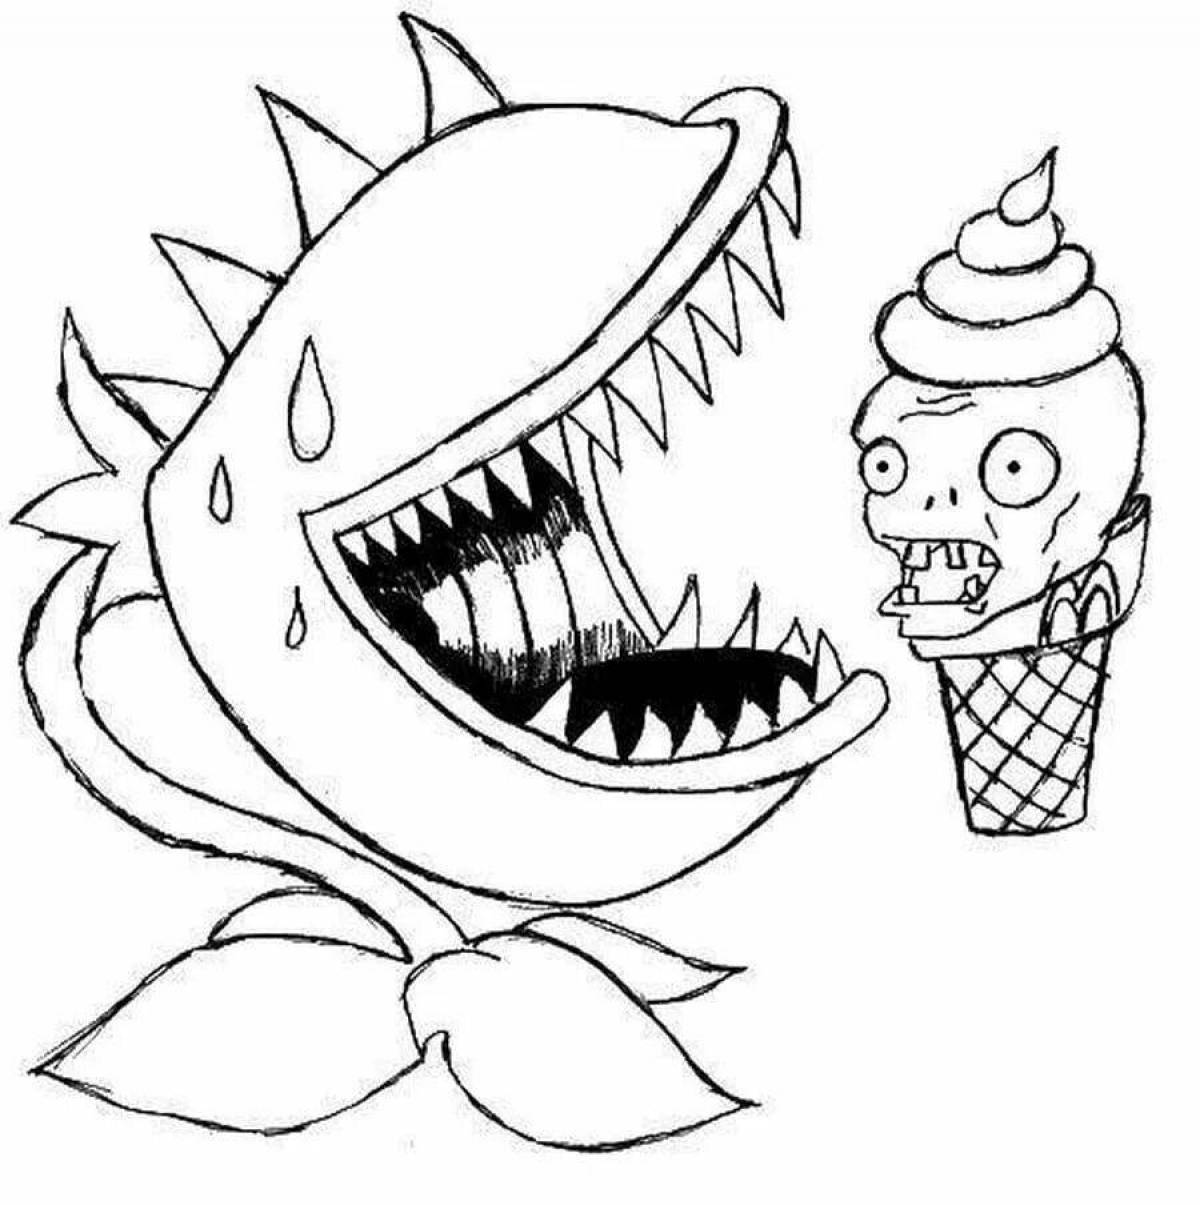 Enchanting plants vs zombies 1 plant coloring page